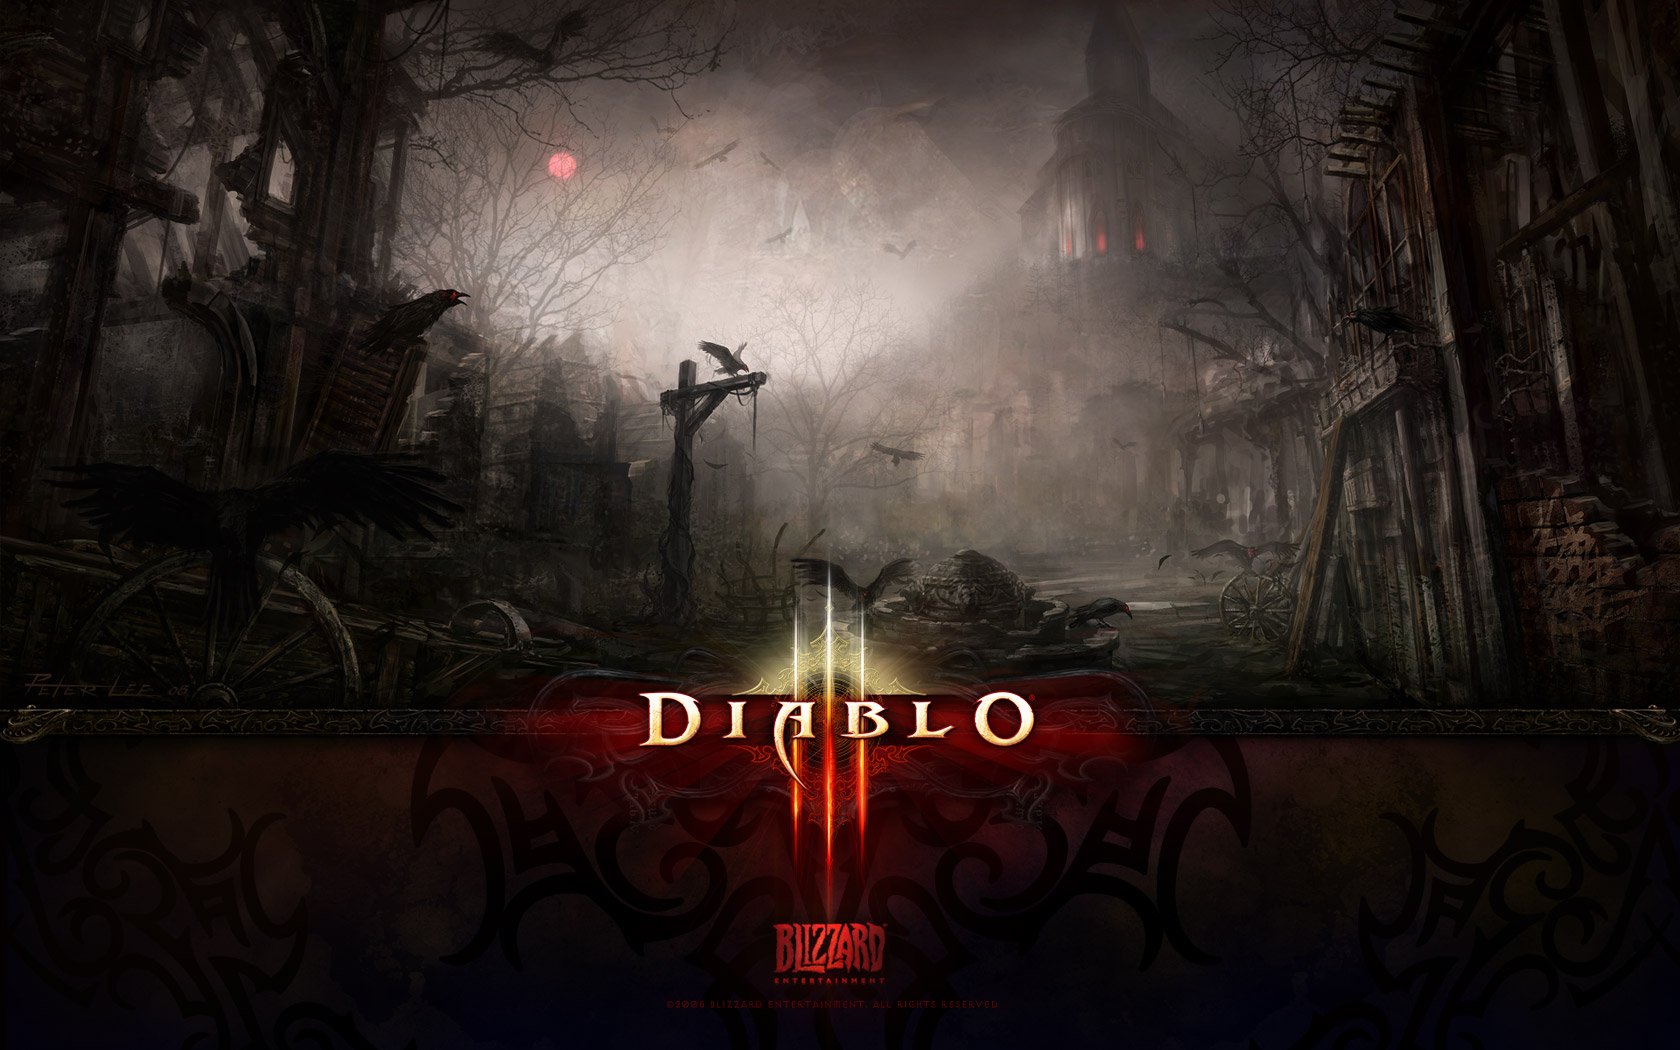 Here Are The Diablo Wallpaper In Various Desktop Sizes From